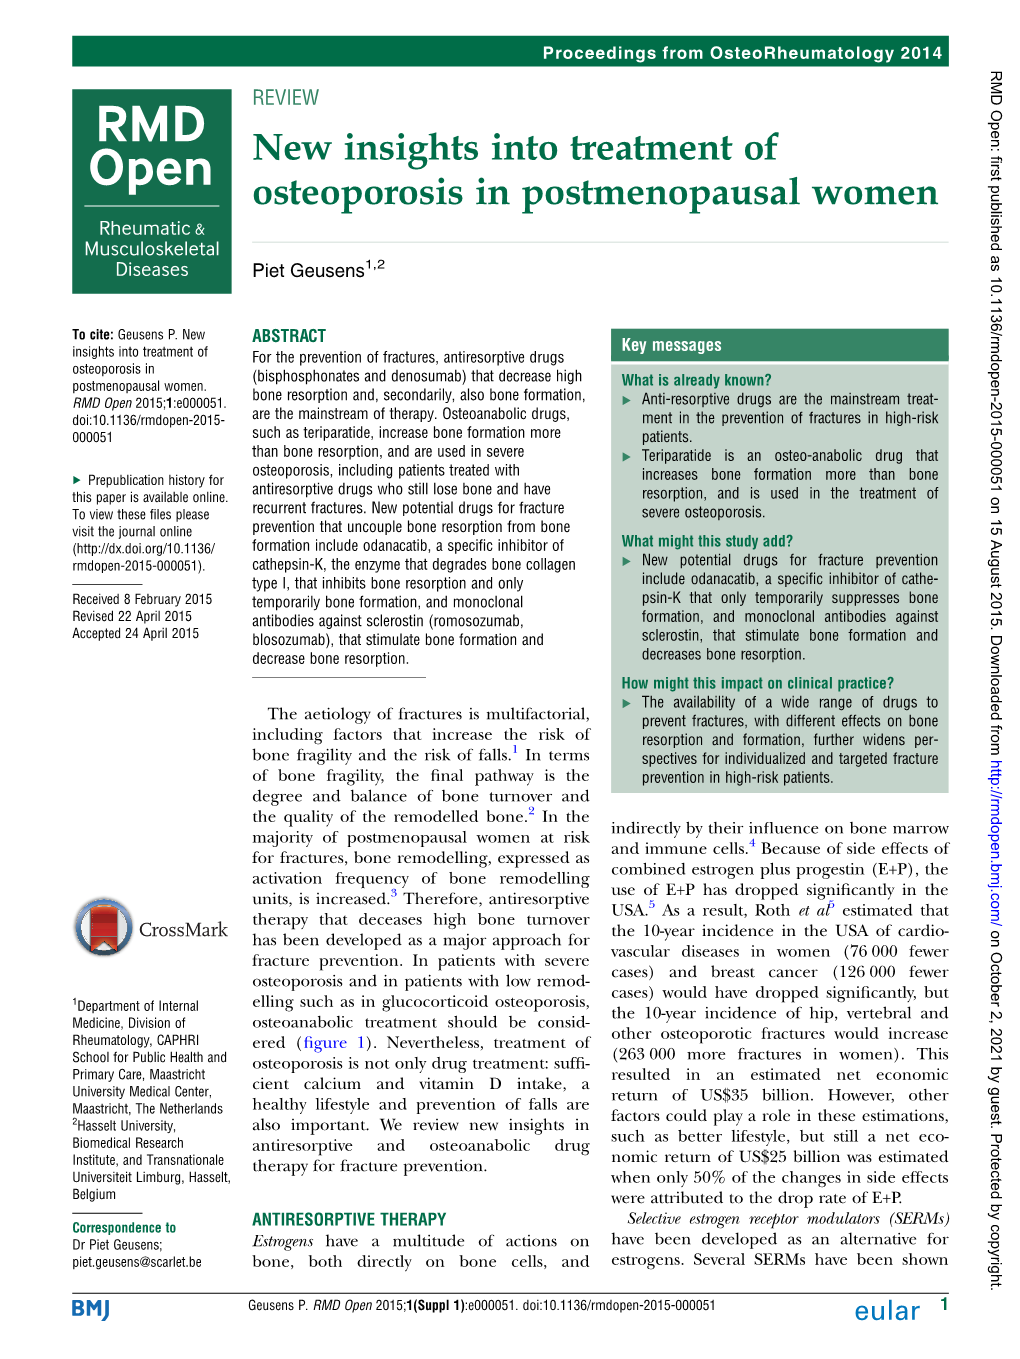 New Insights Into Treatment of Osteoporosis in Postmenopausal Women